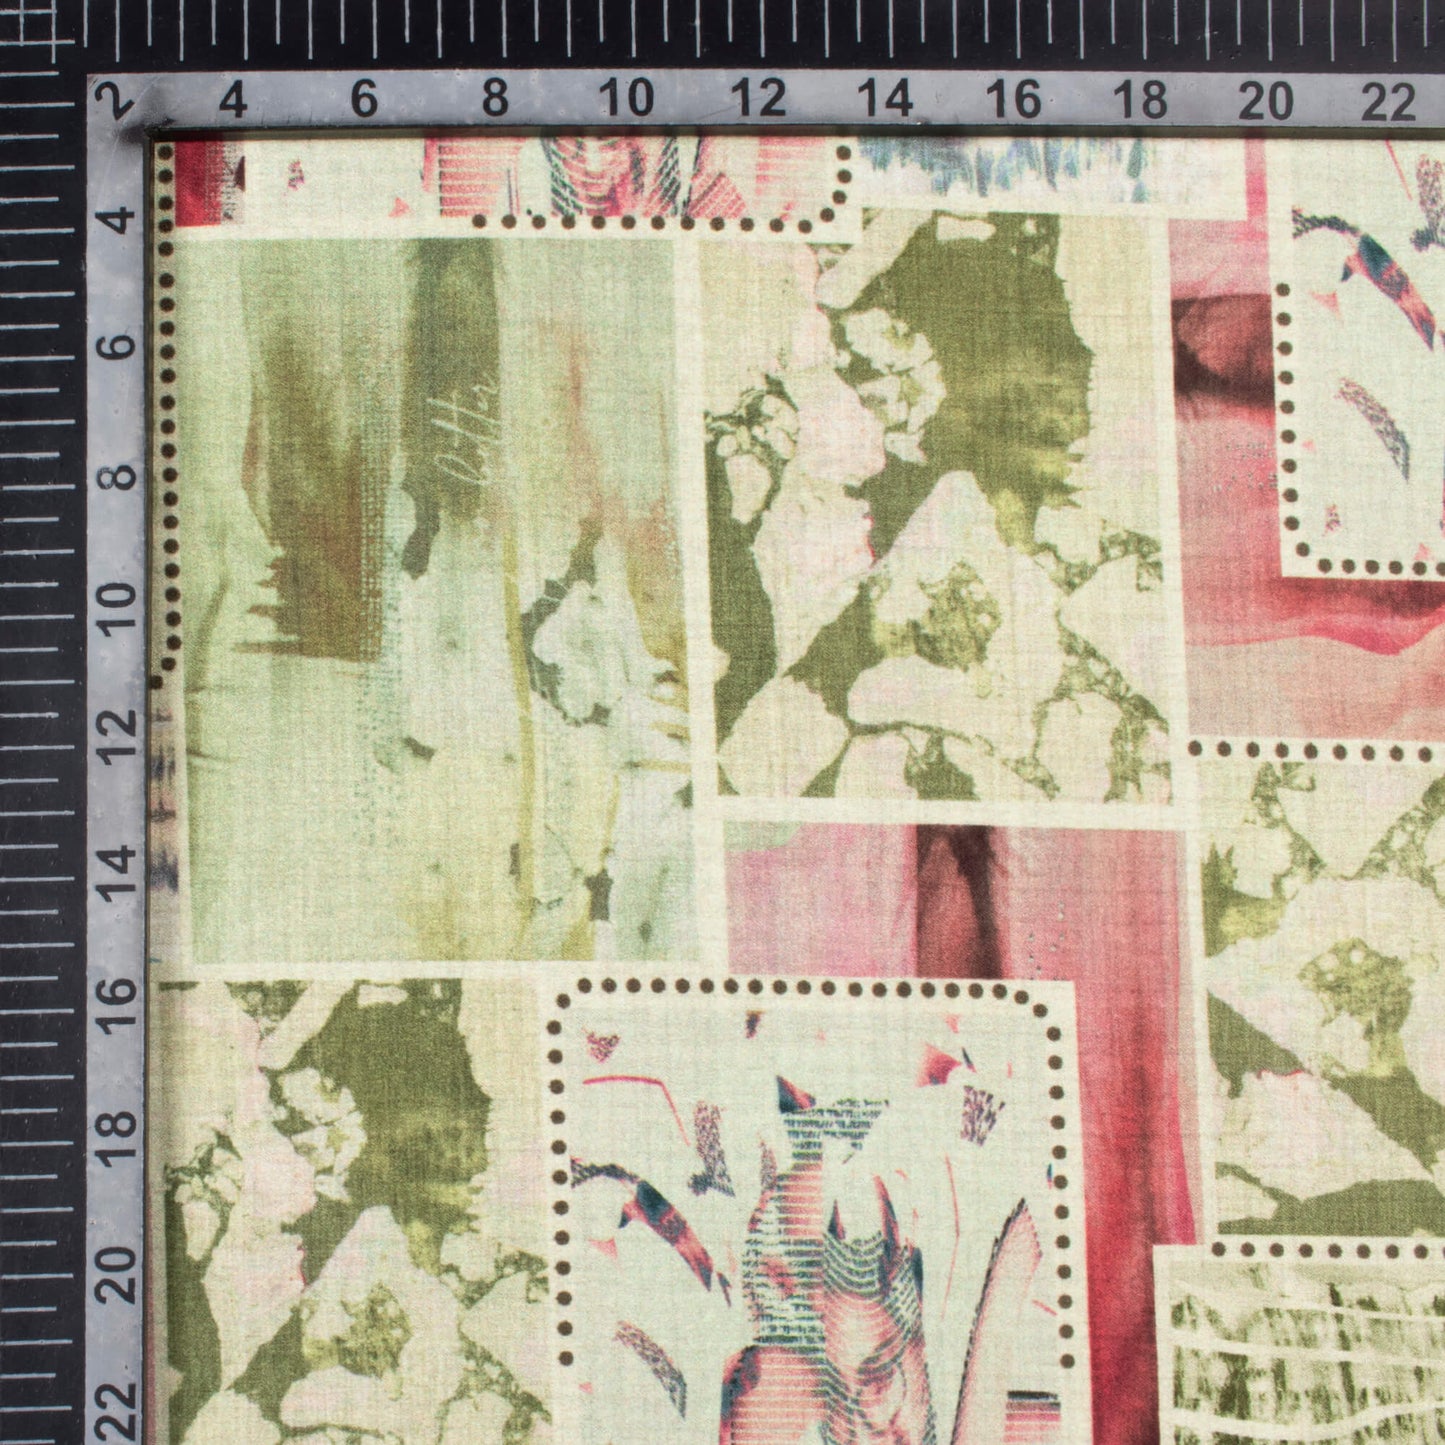 Pistachio Green And Pale Pink Patch Pattern Digital Print Lush Satin Fabric